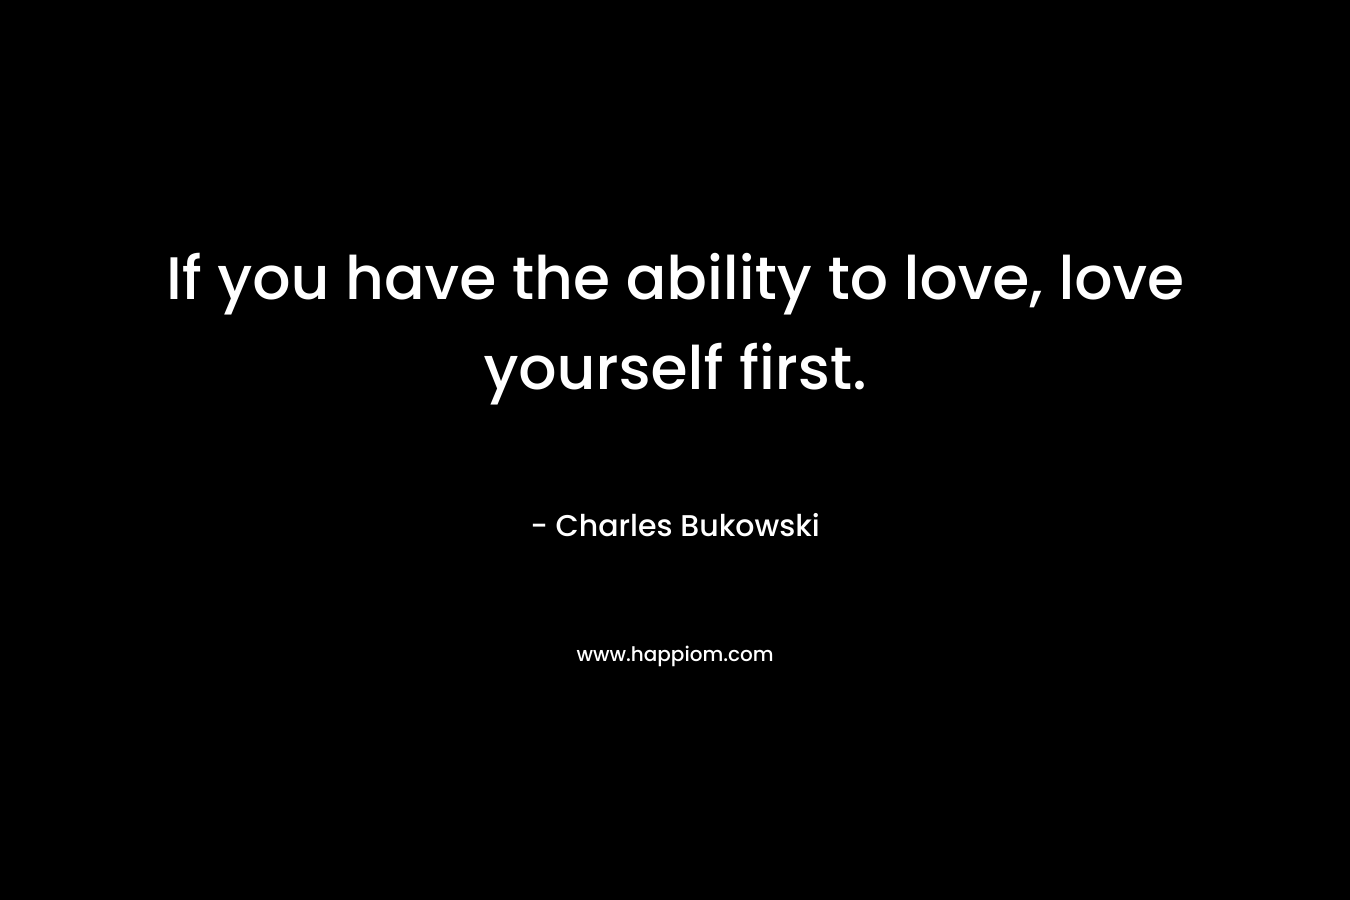 If you have the ability to love, love yourself first.